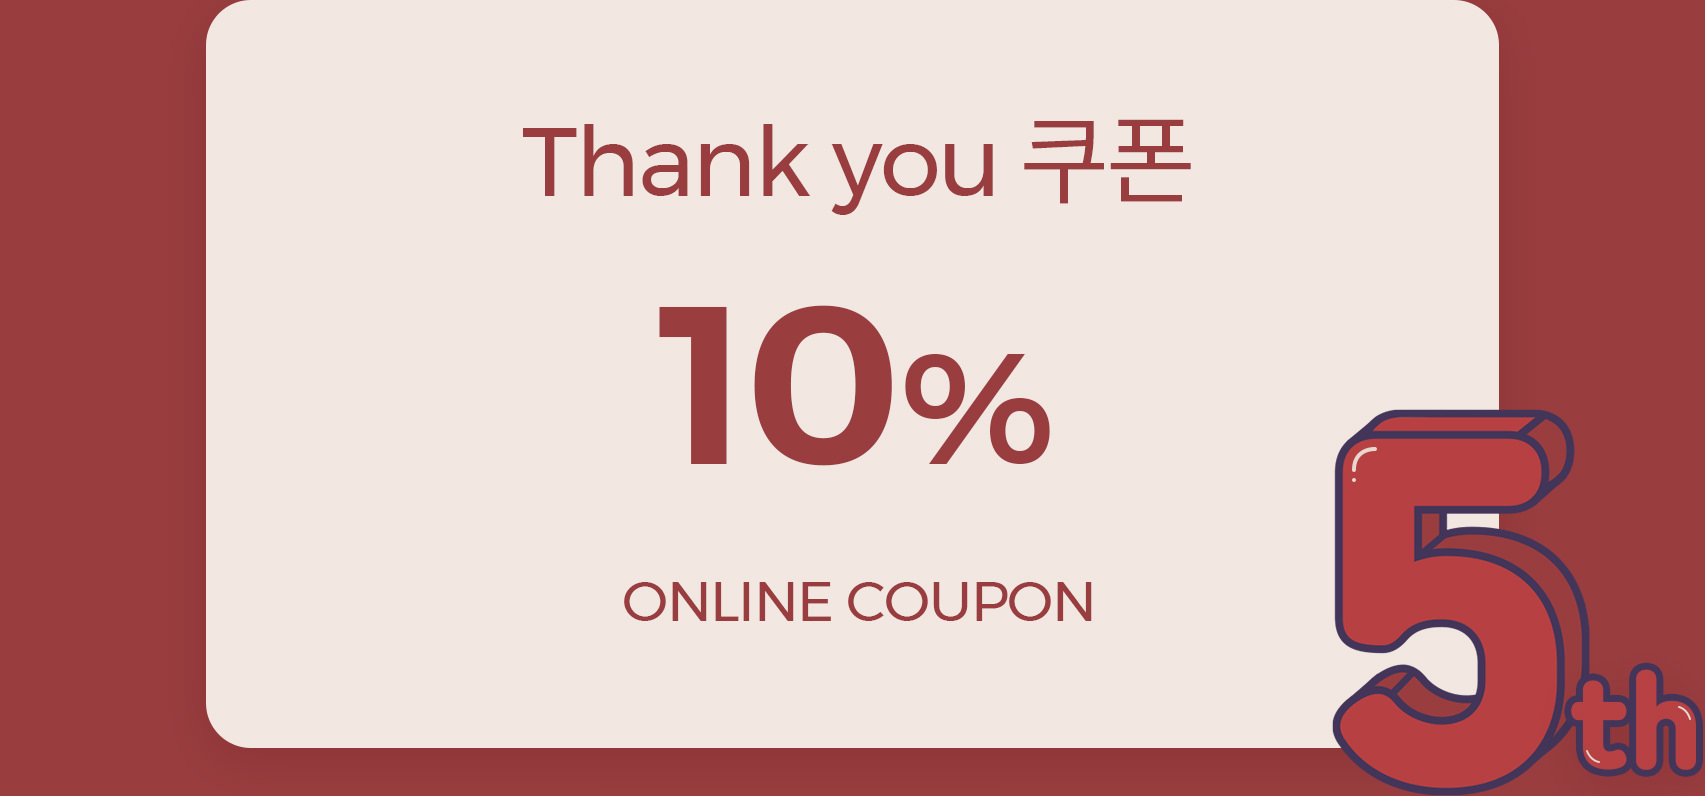 Thank you 10% ONLINE COUPON